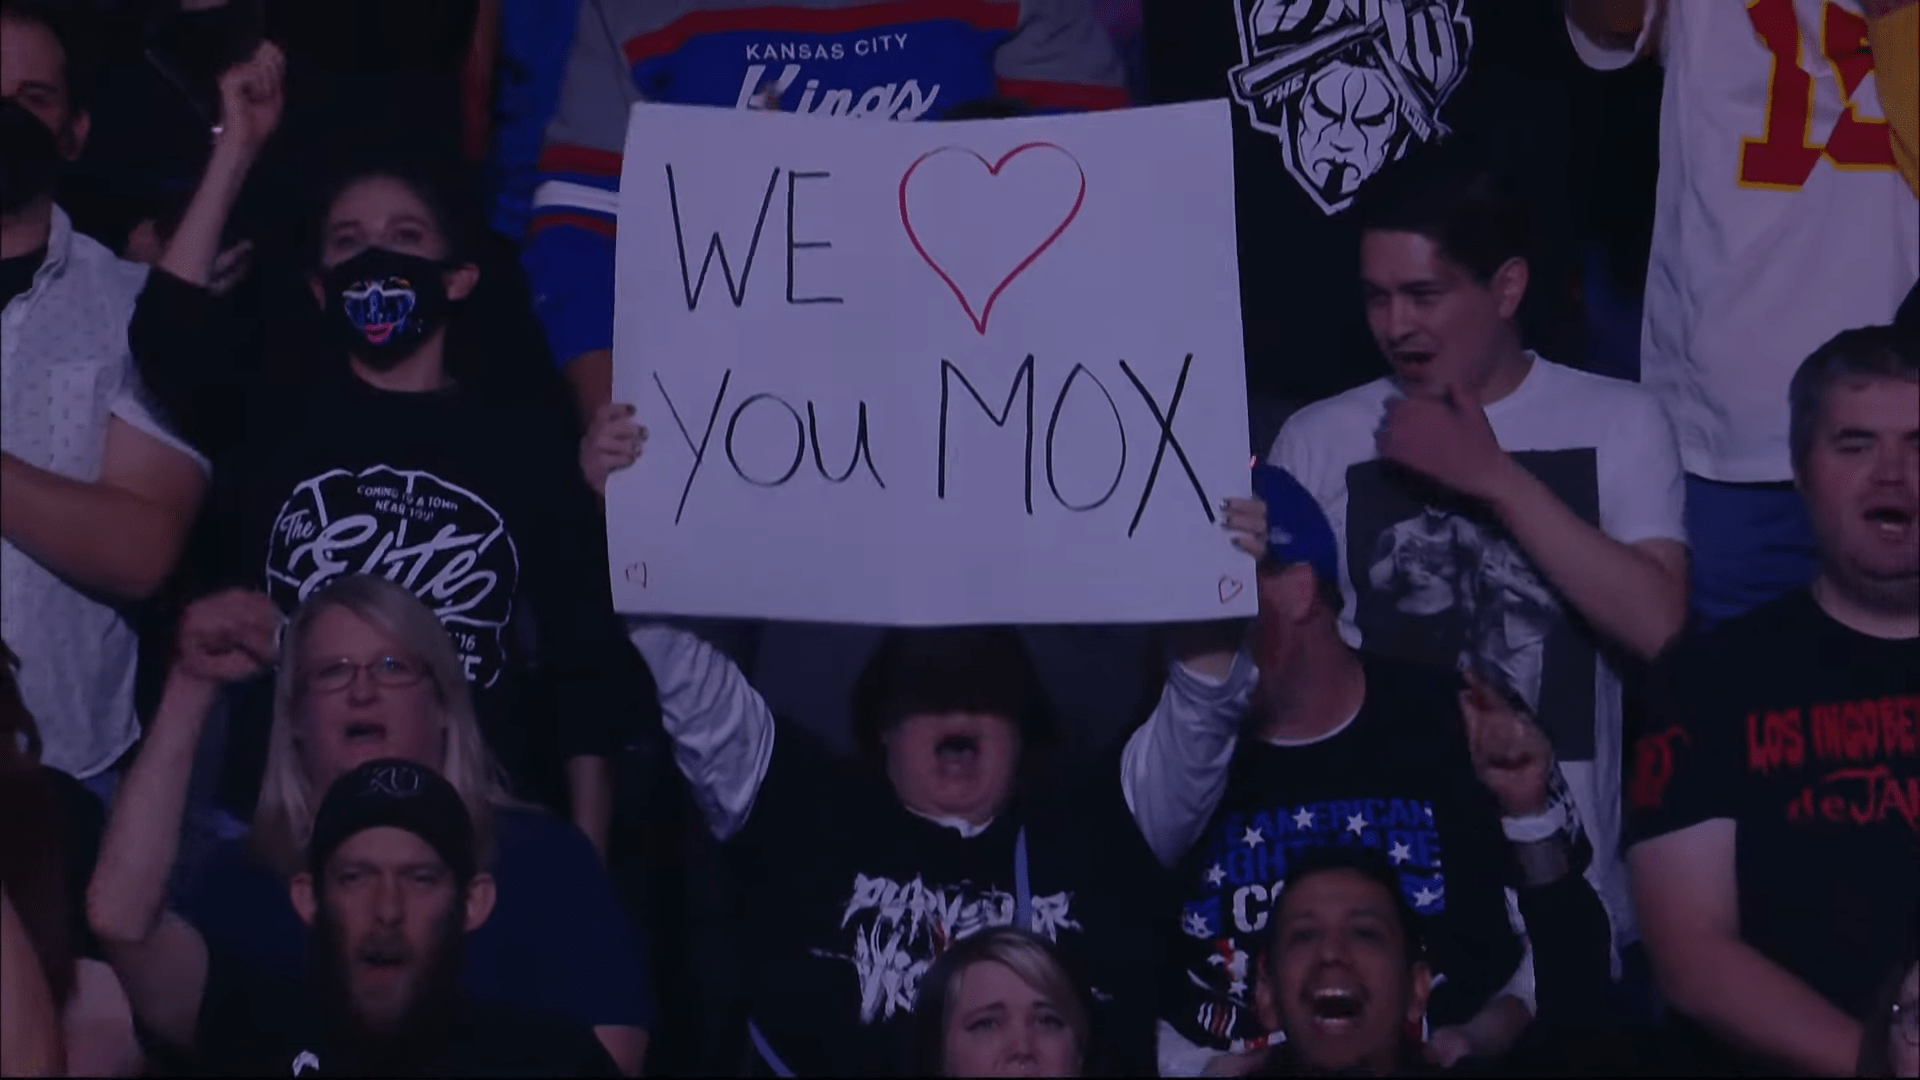 AEW fan with sign supporting Jon Moxley